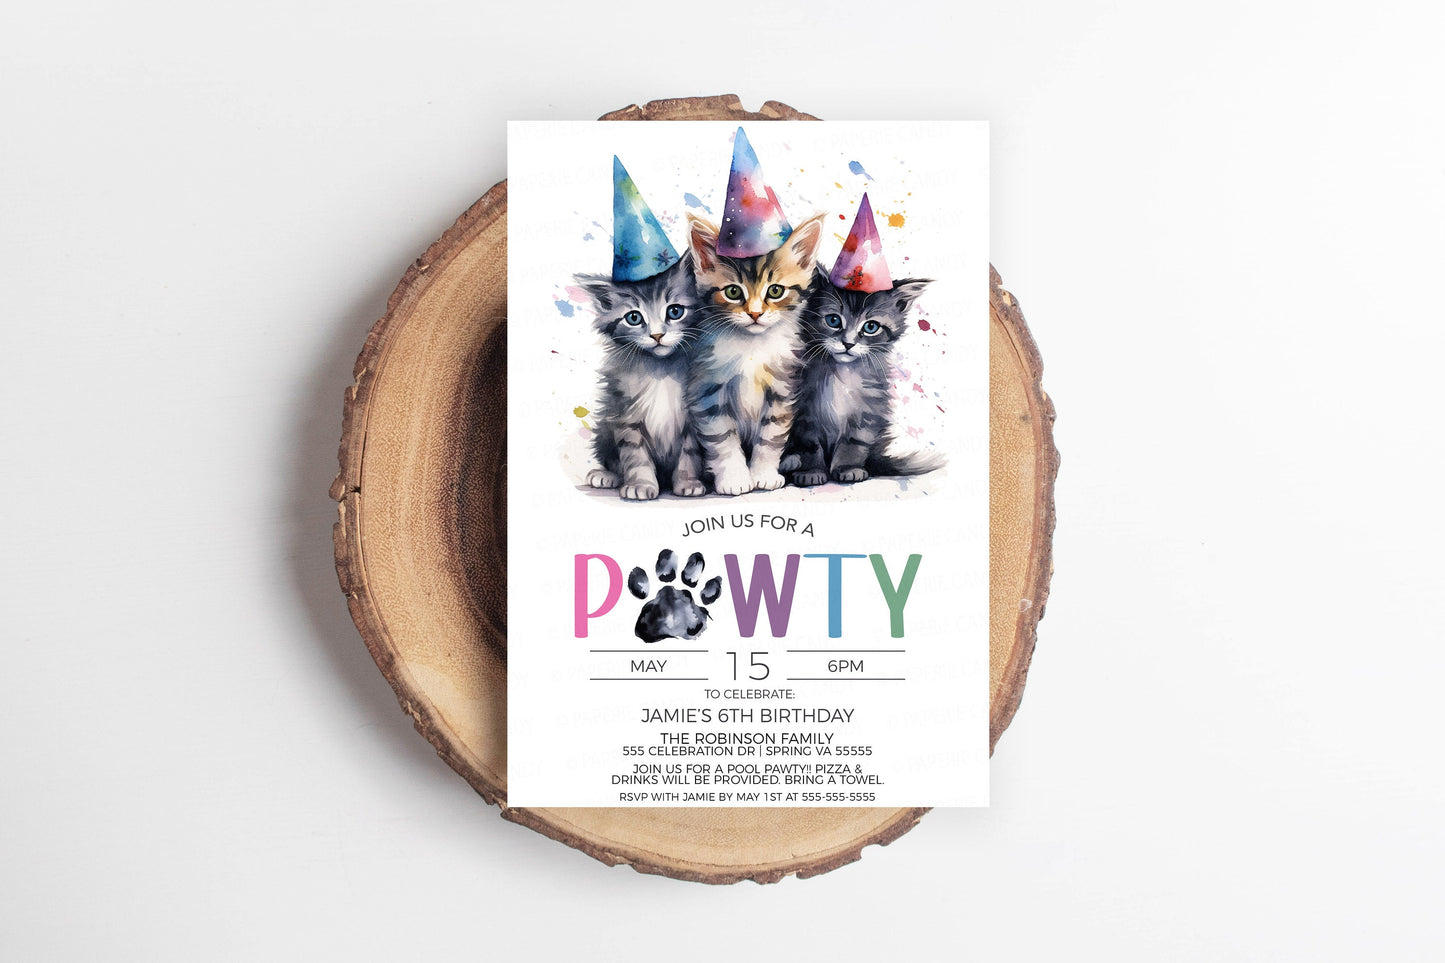 Kitten Invitation, Kitten Pawty Invite, Kittens Cat Birthday Party, Let's Pawty, Calling All Pawty Animals, Editable Printable Template